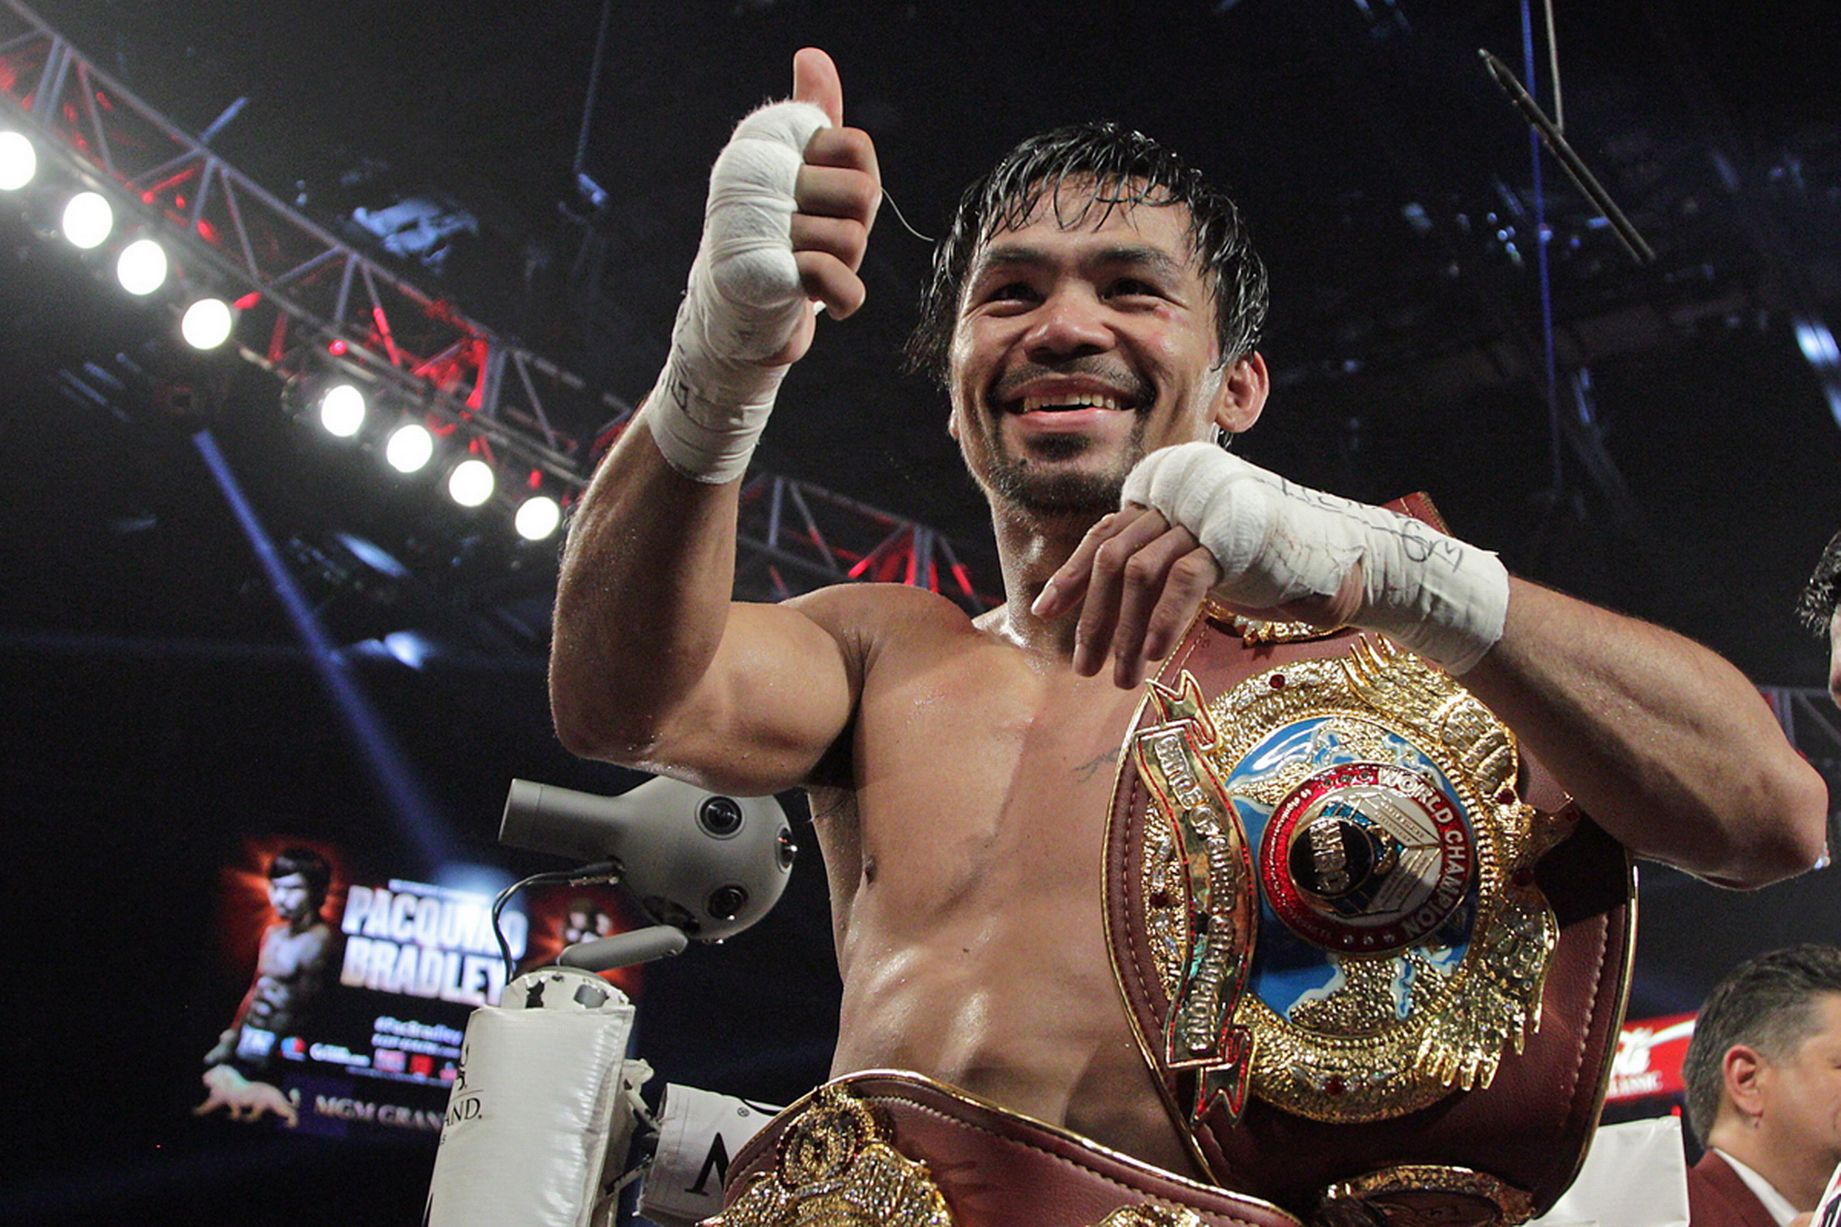 manny-pacquiao-gestures-to-fans-as-he-celebrates-after-defeating-timothy-bradley-jr.jpg